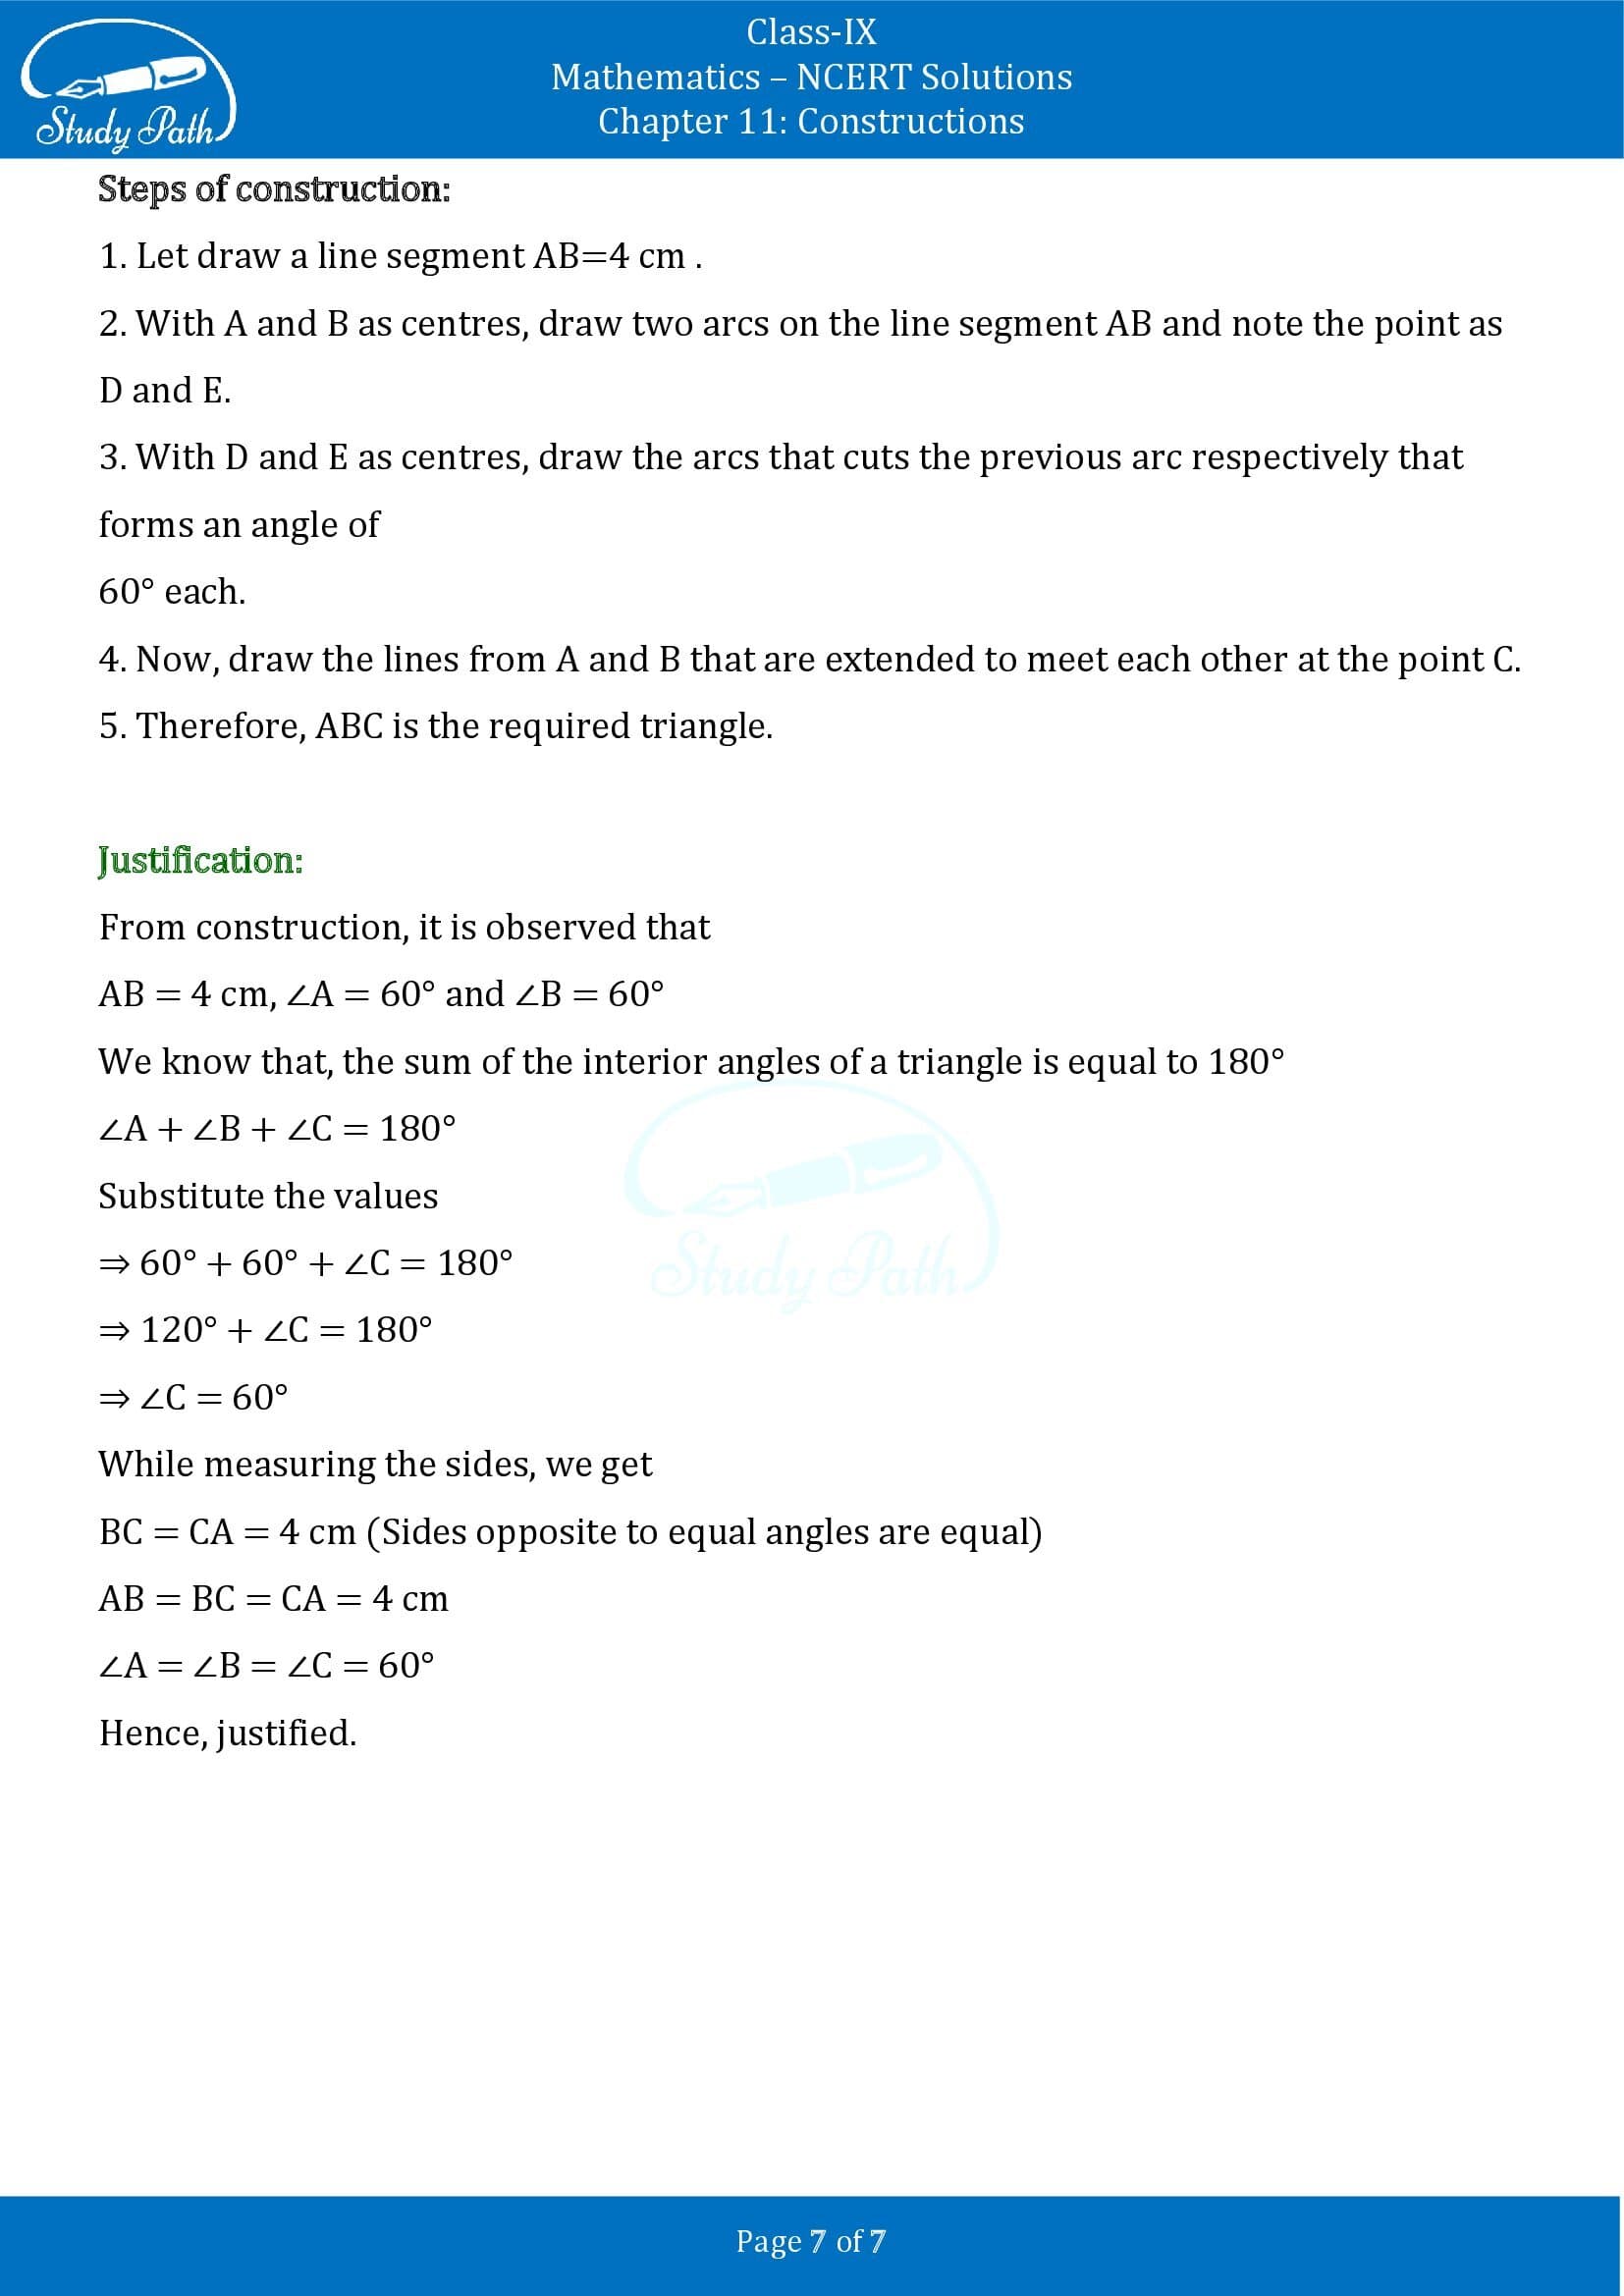 NCERT Solutions for Class 9 Maths Chapter 11 Constructions Exercise 11.1 00007